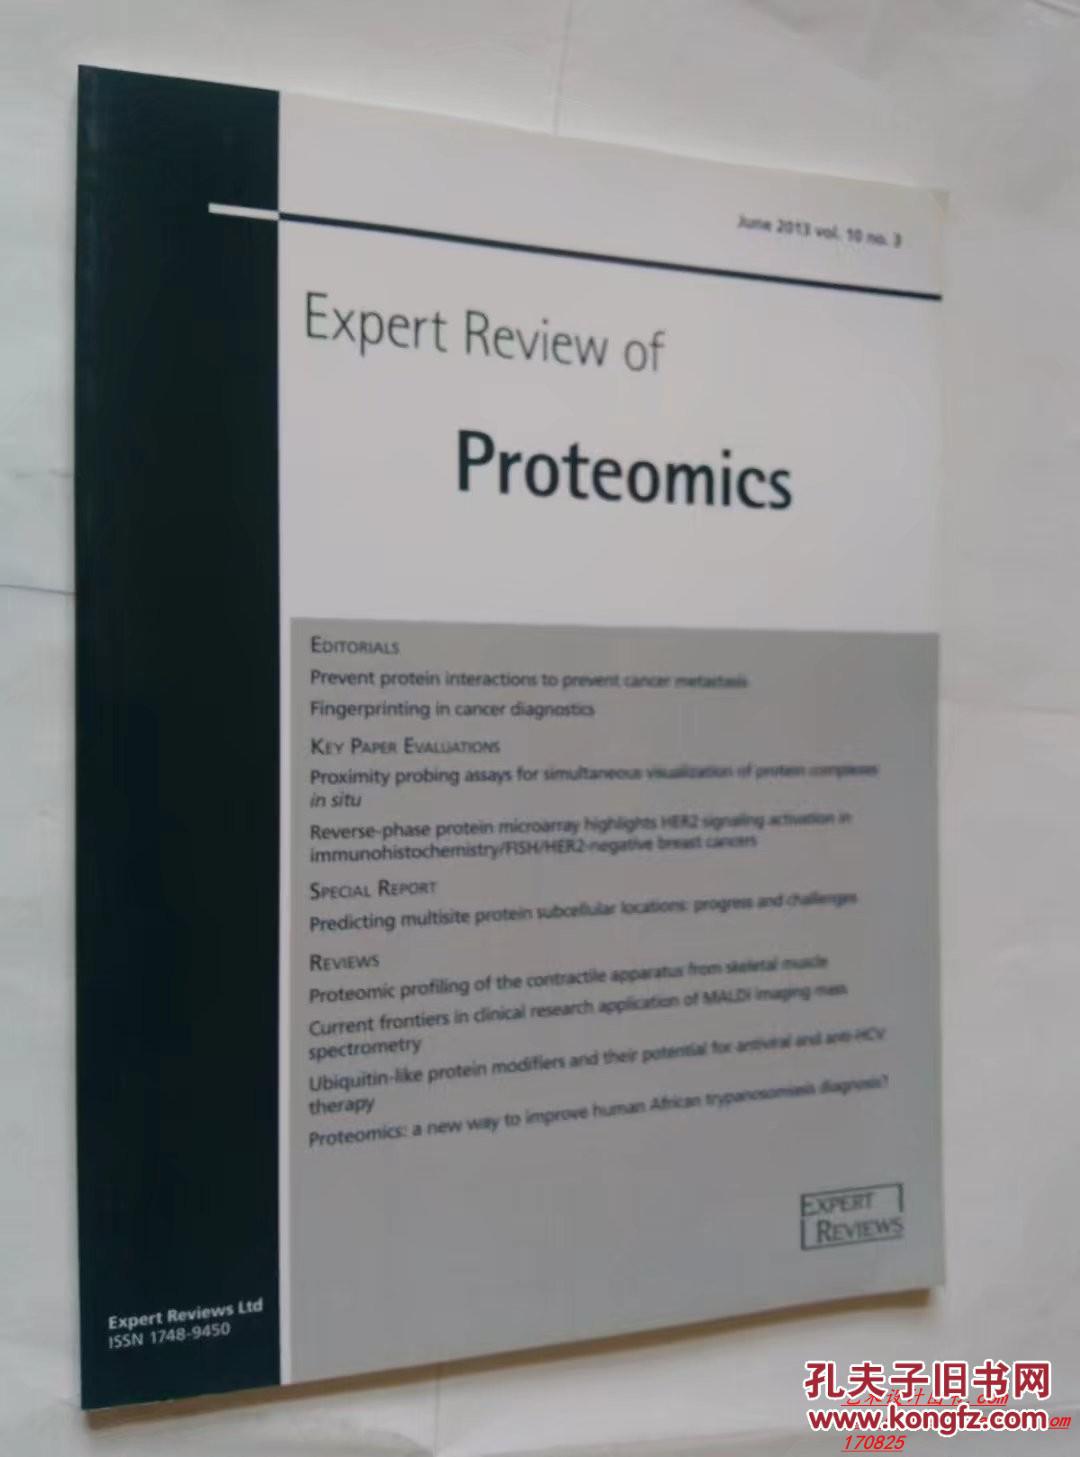 Expert Review of Proteomics  2013/06蛋白质组学学术原版期刊